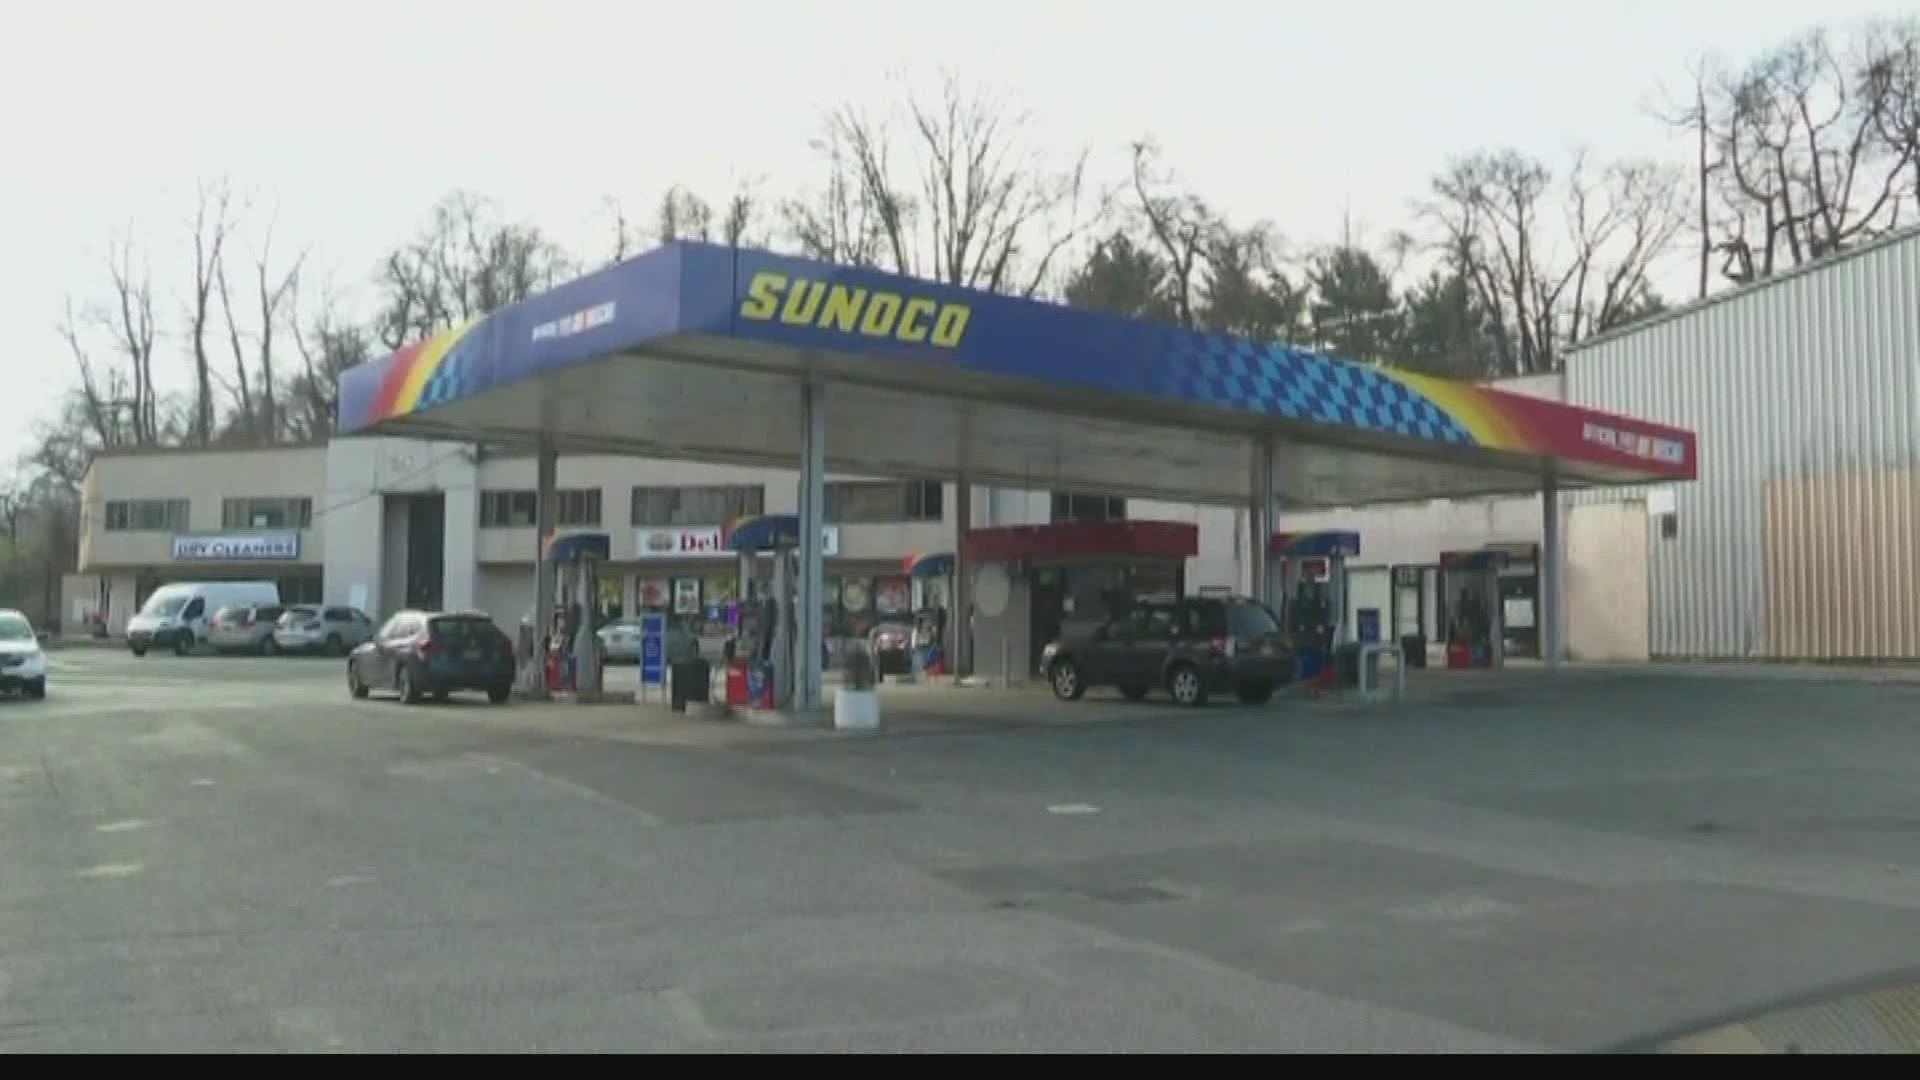 Experts are saying gas prices could fall to 99 cents in some states because of the coronavirus.